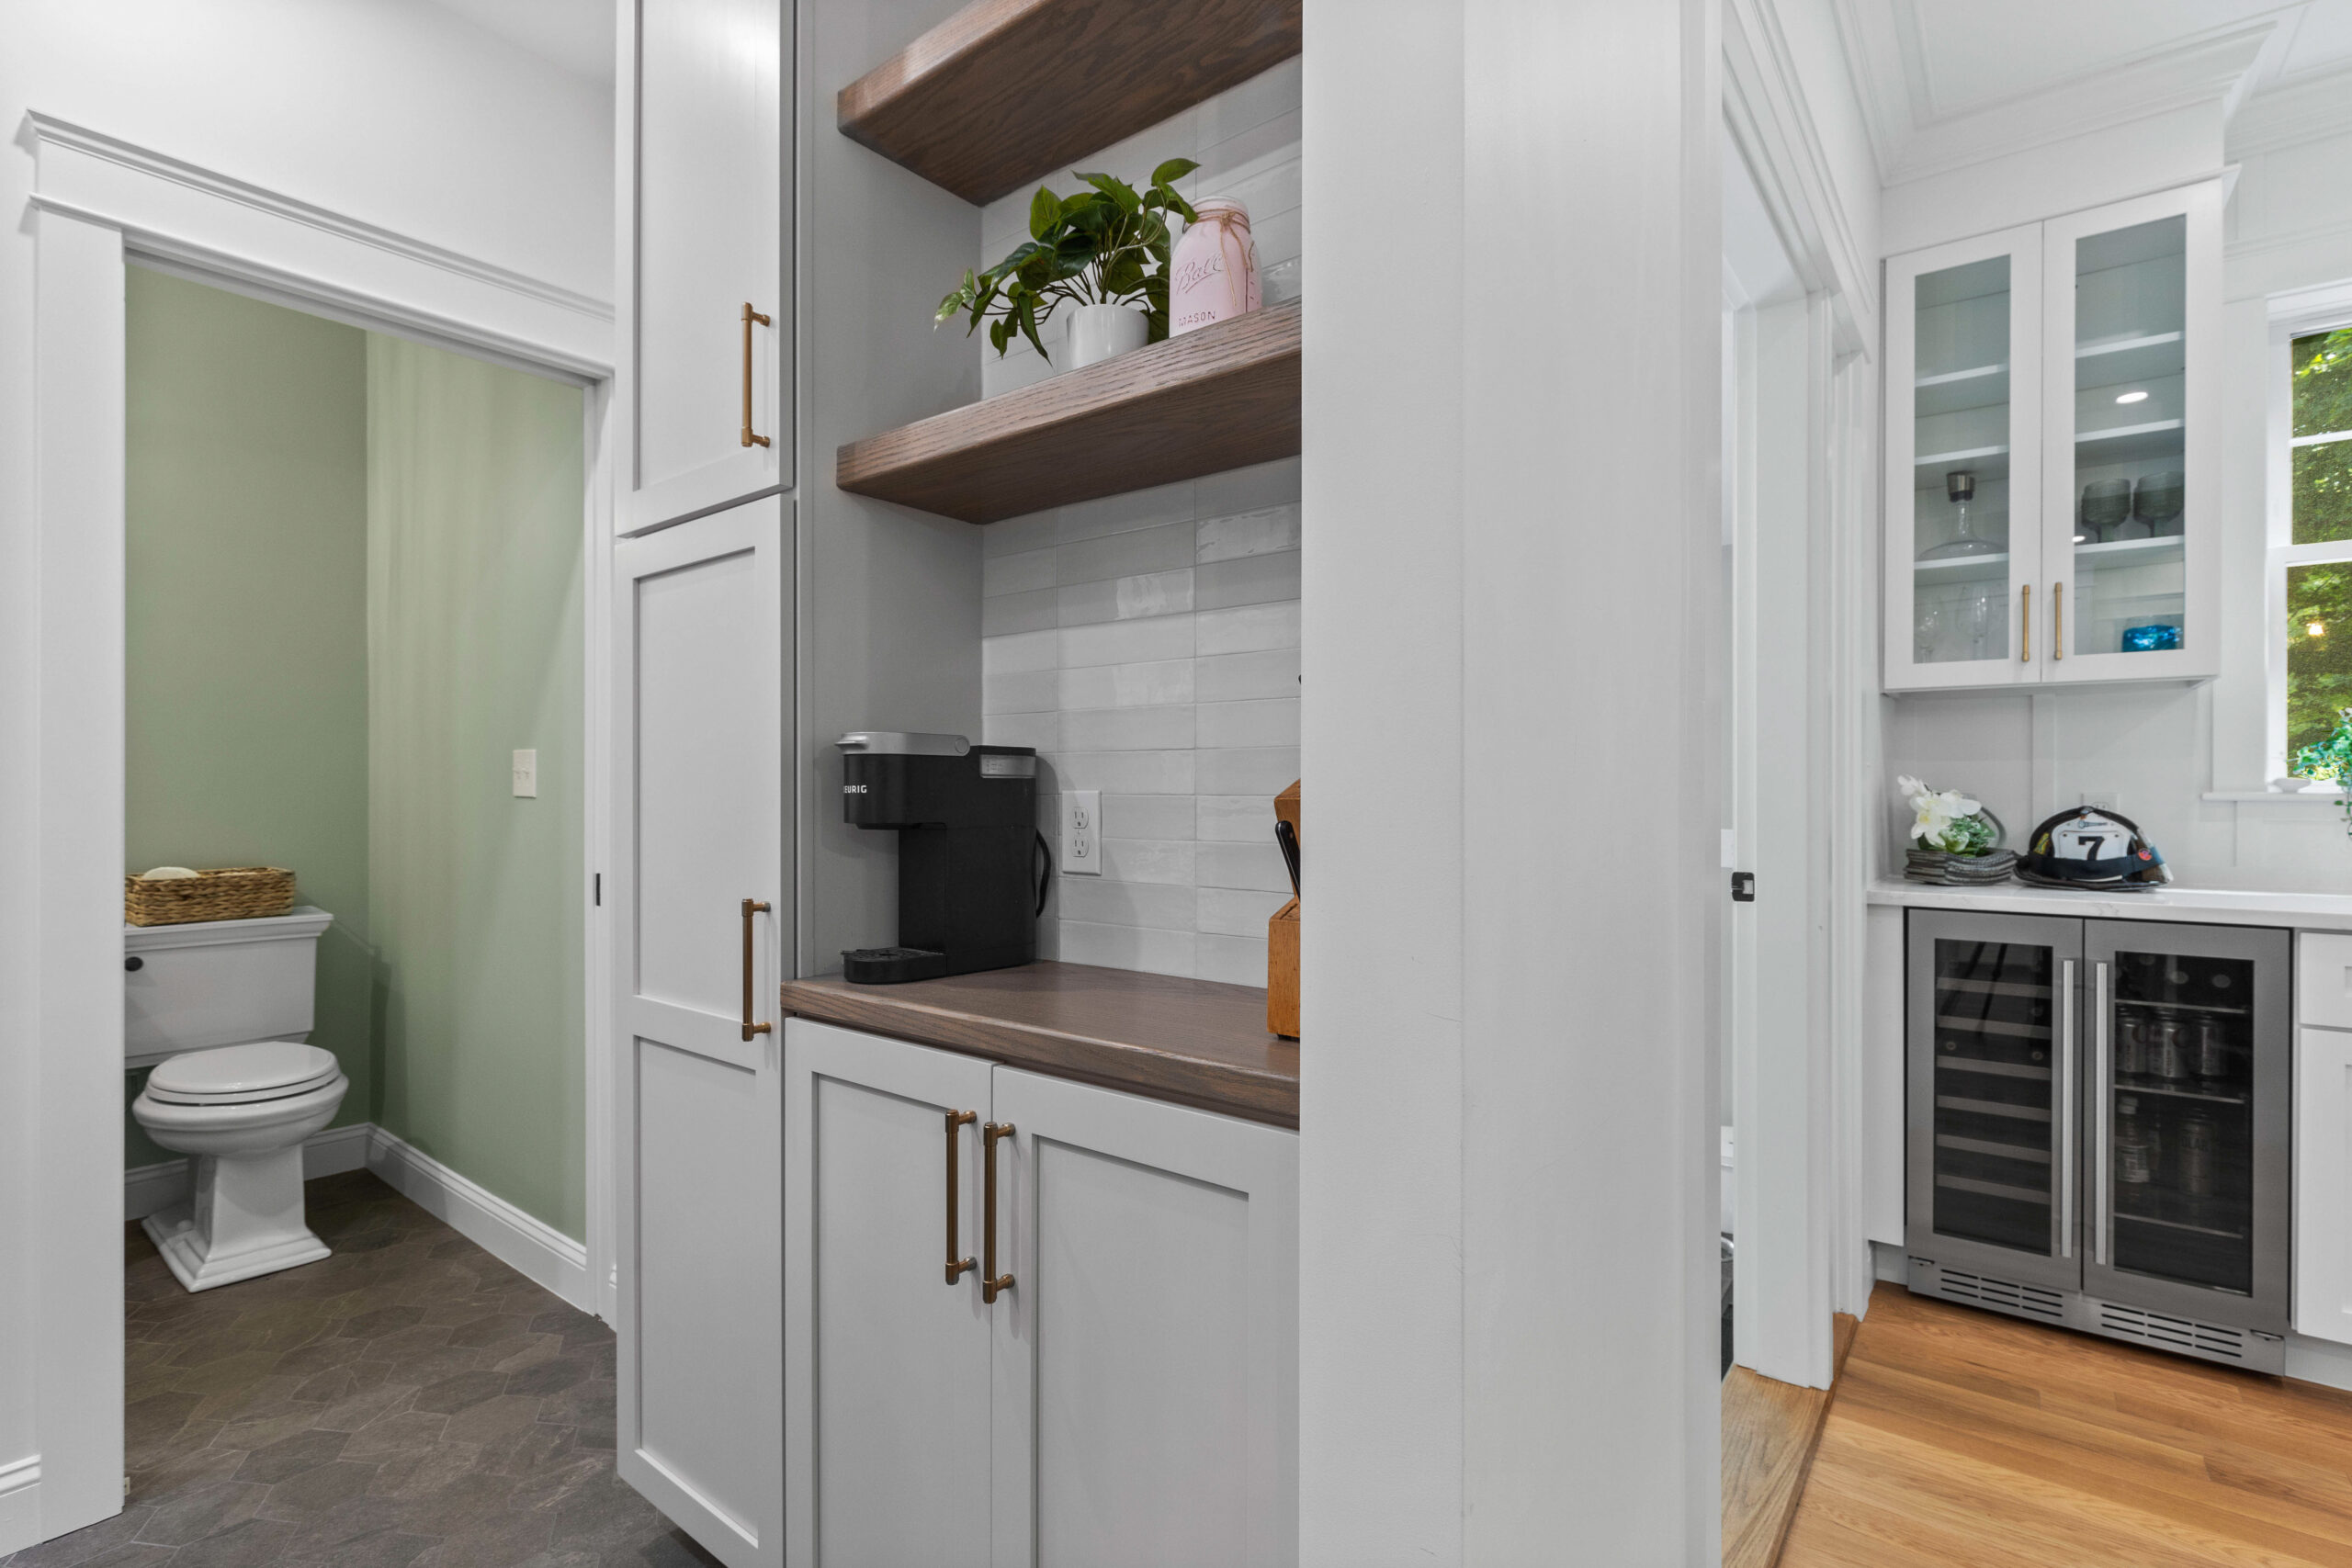 After image of a renovated coffee nook and adjacent bathroom in a vintage New England home, showcasing modern cabinetry, stylish open shelving, and a refreshed bathroom with elegant fixtures